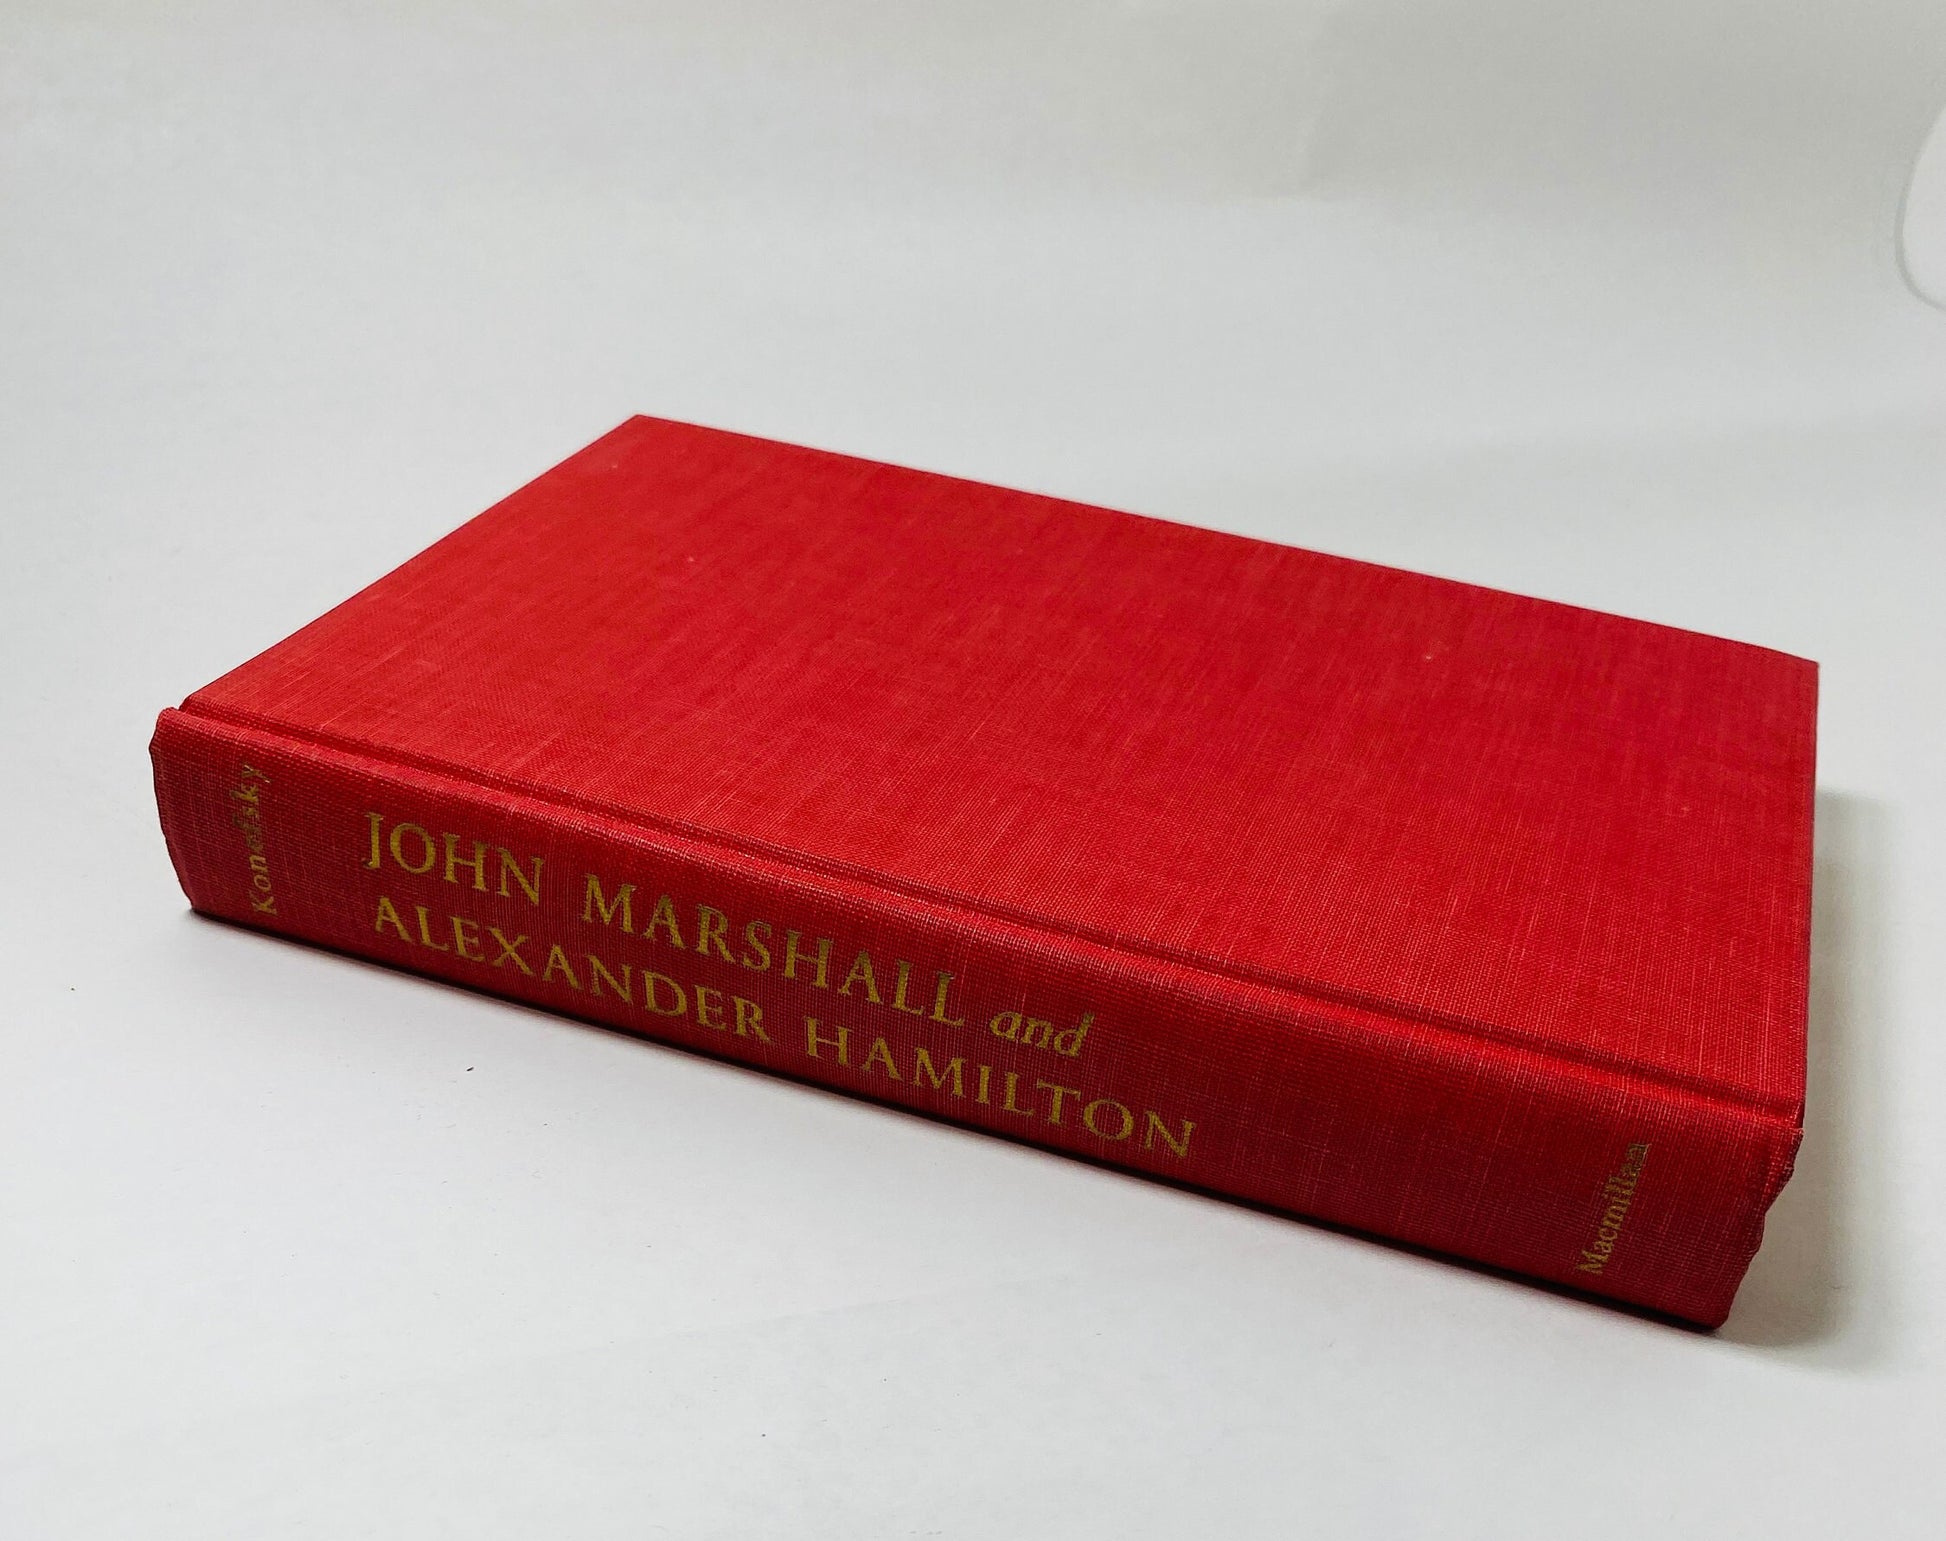 John Marshall and Alexander Hamilton FIRST EDITION vintage book about the American Constitution by Samuel Konefsky circa 1972 history gift